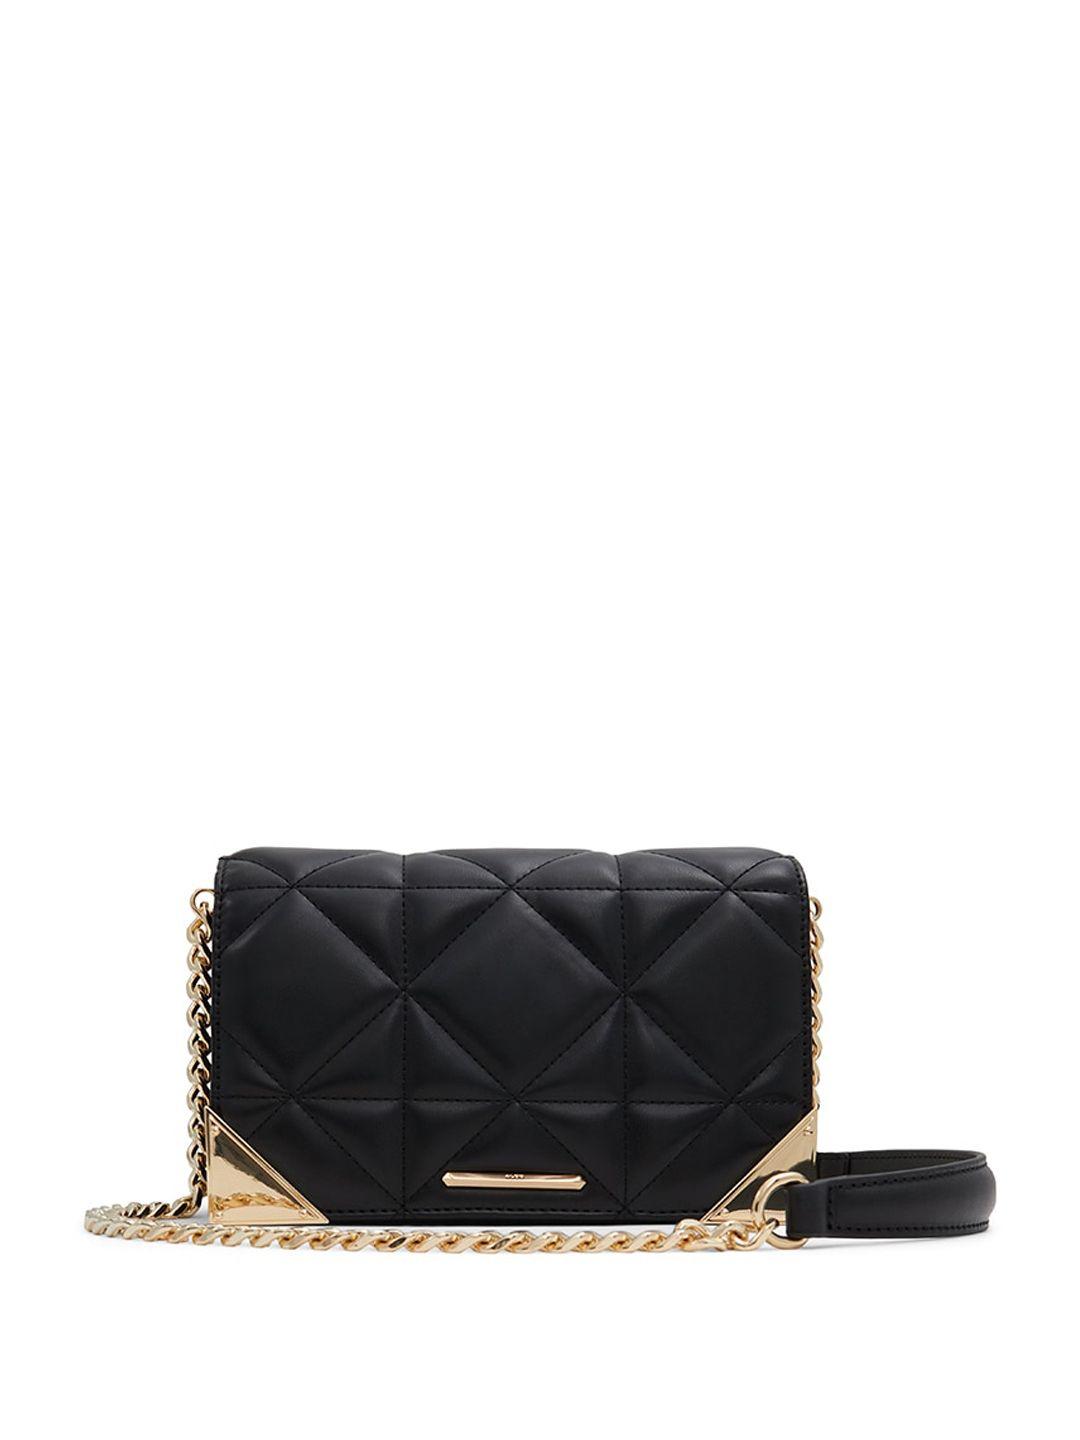 aldo geometric structured sling bag with quilted